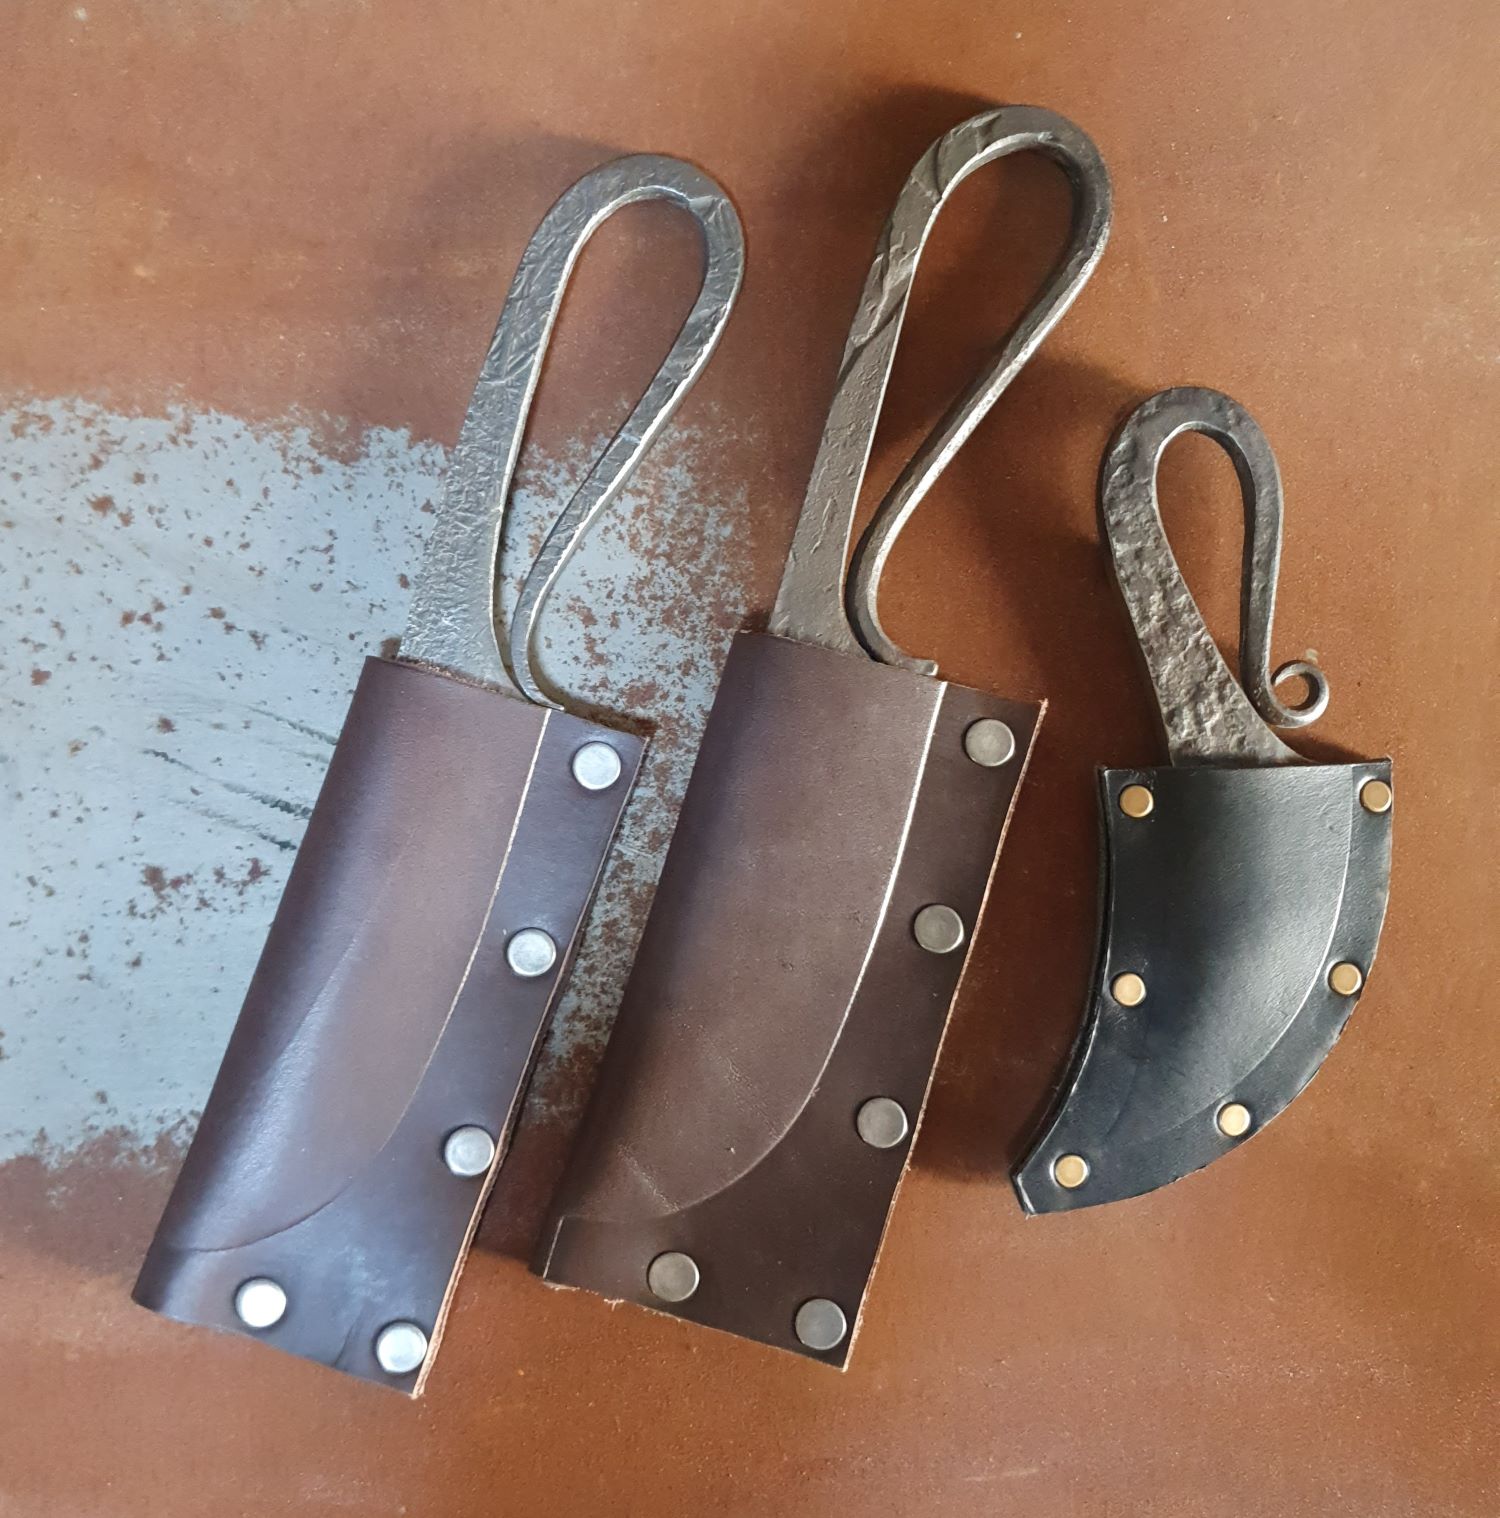 Leather sheaths for your handforged knife